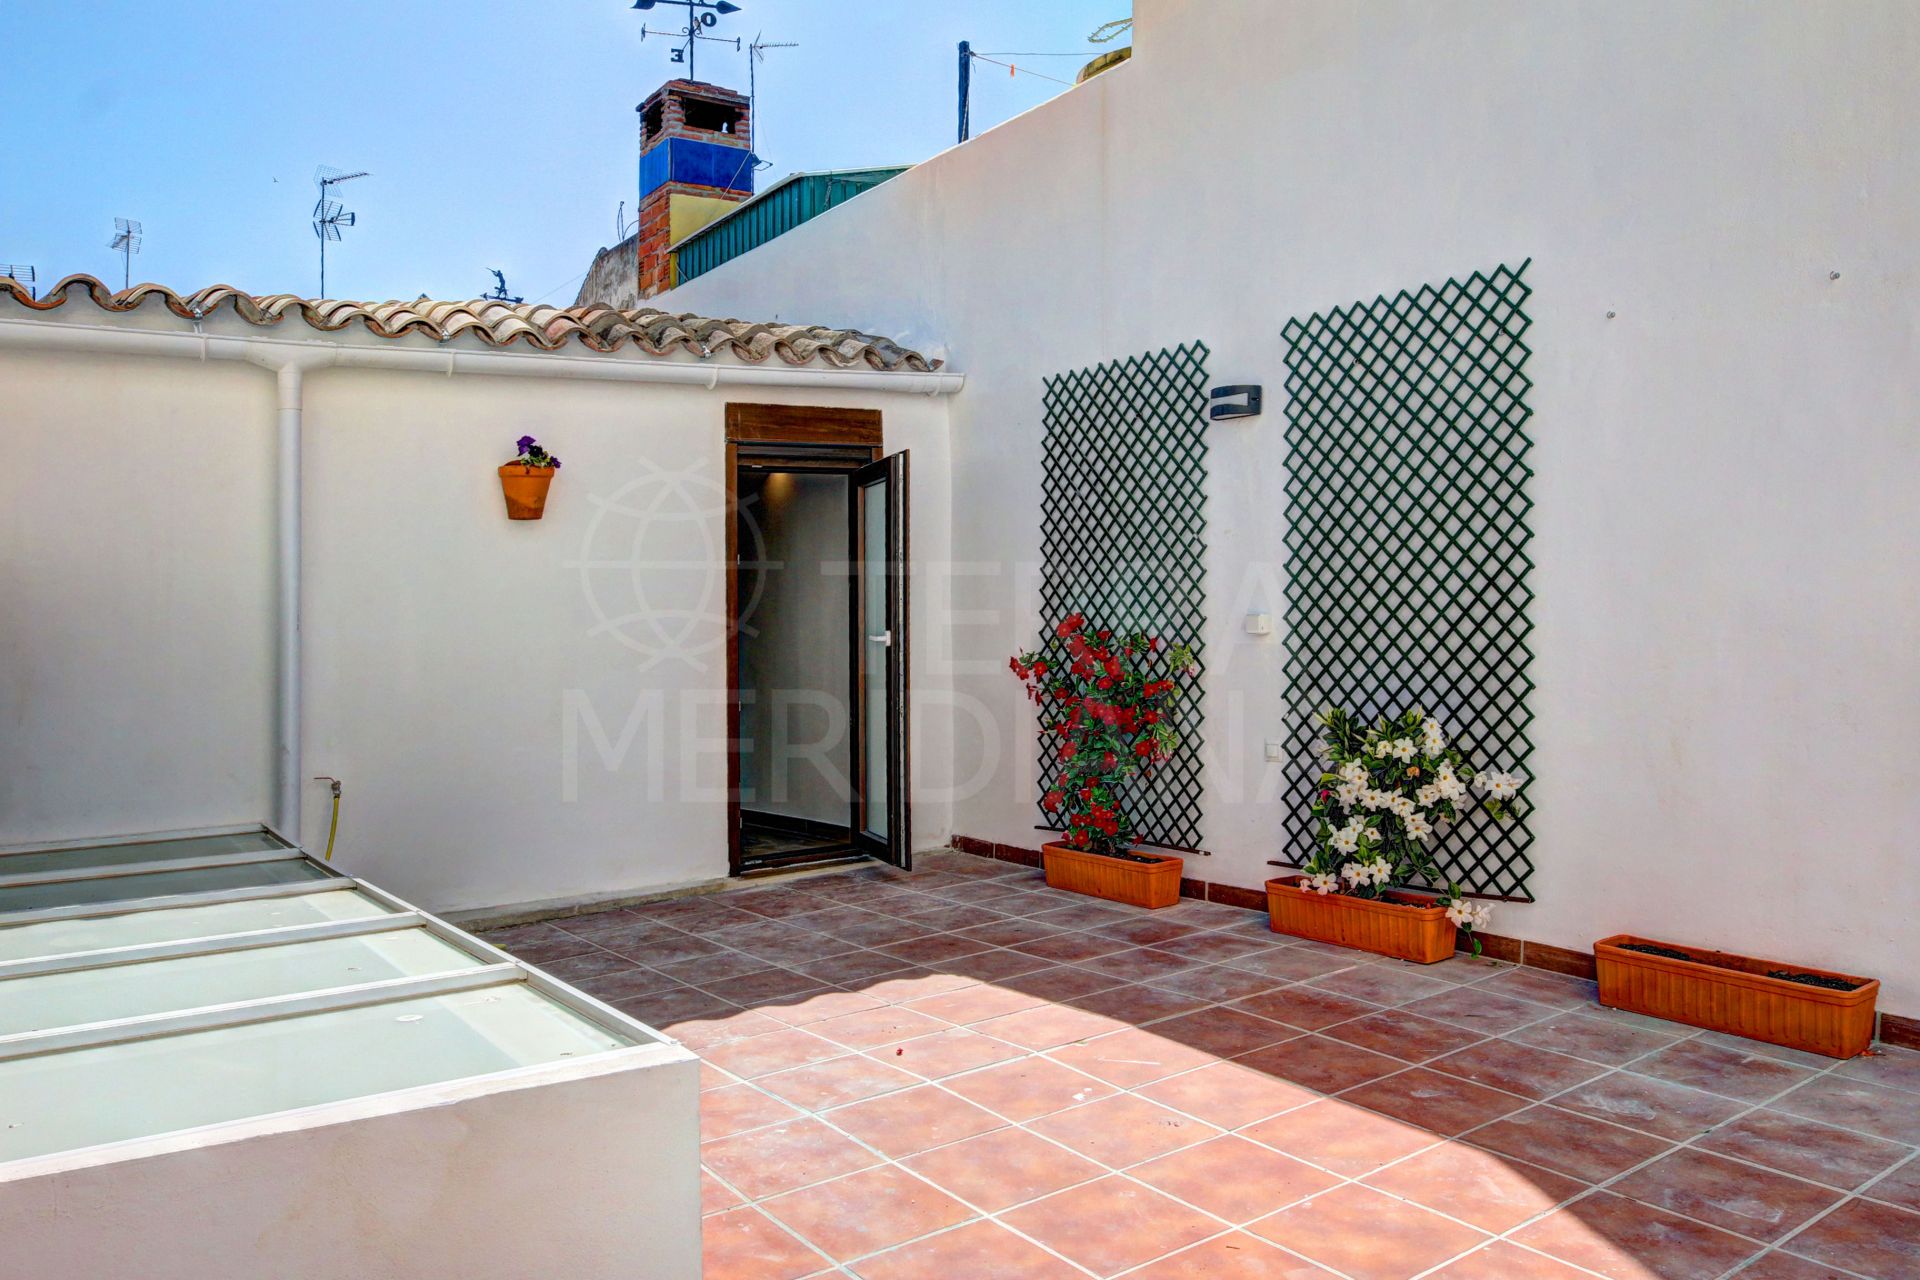 Renovated townhouse for sale in the charming old town of Estepona